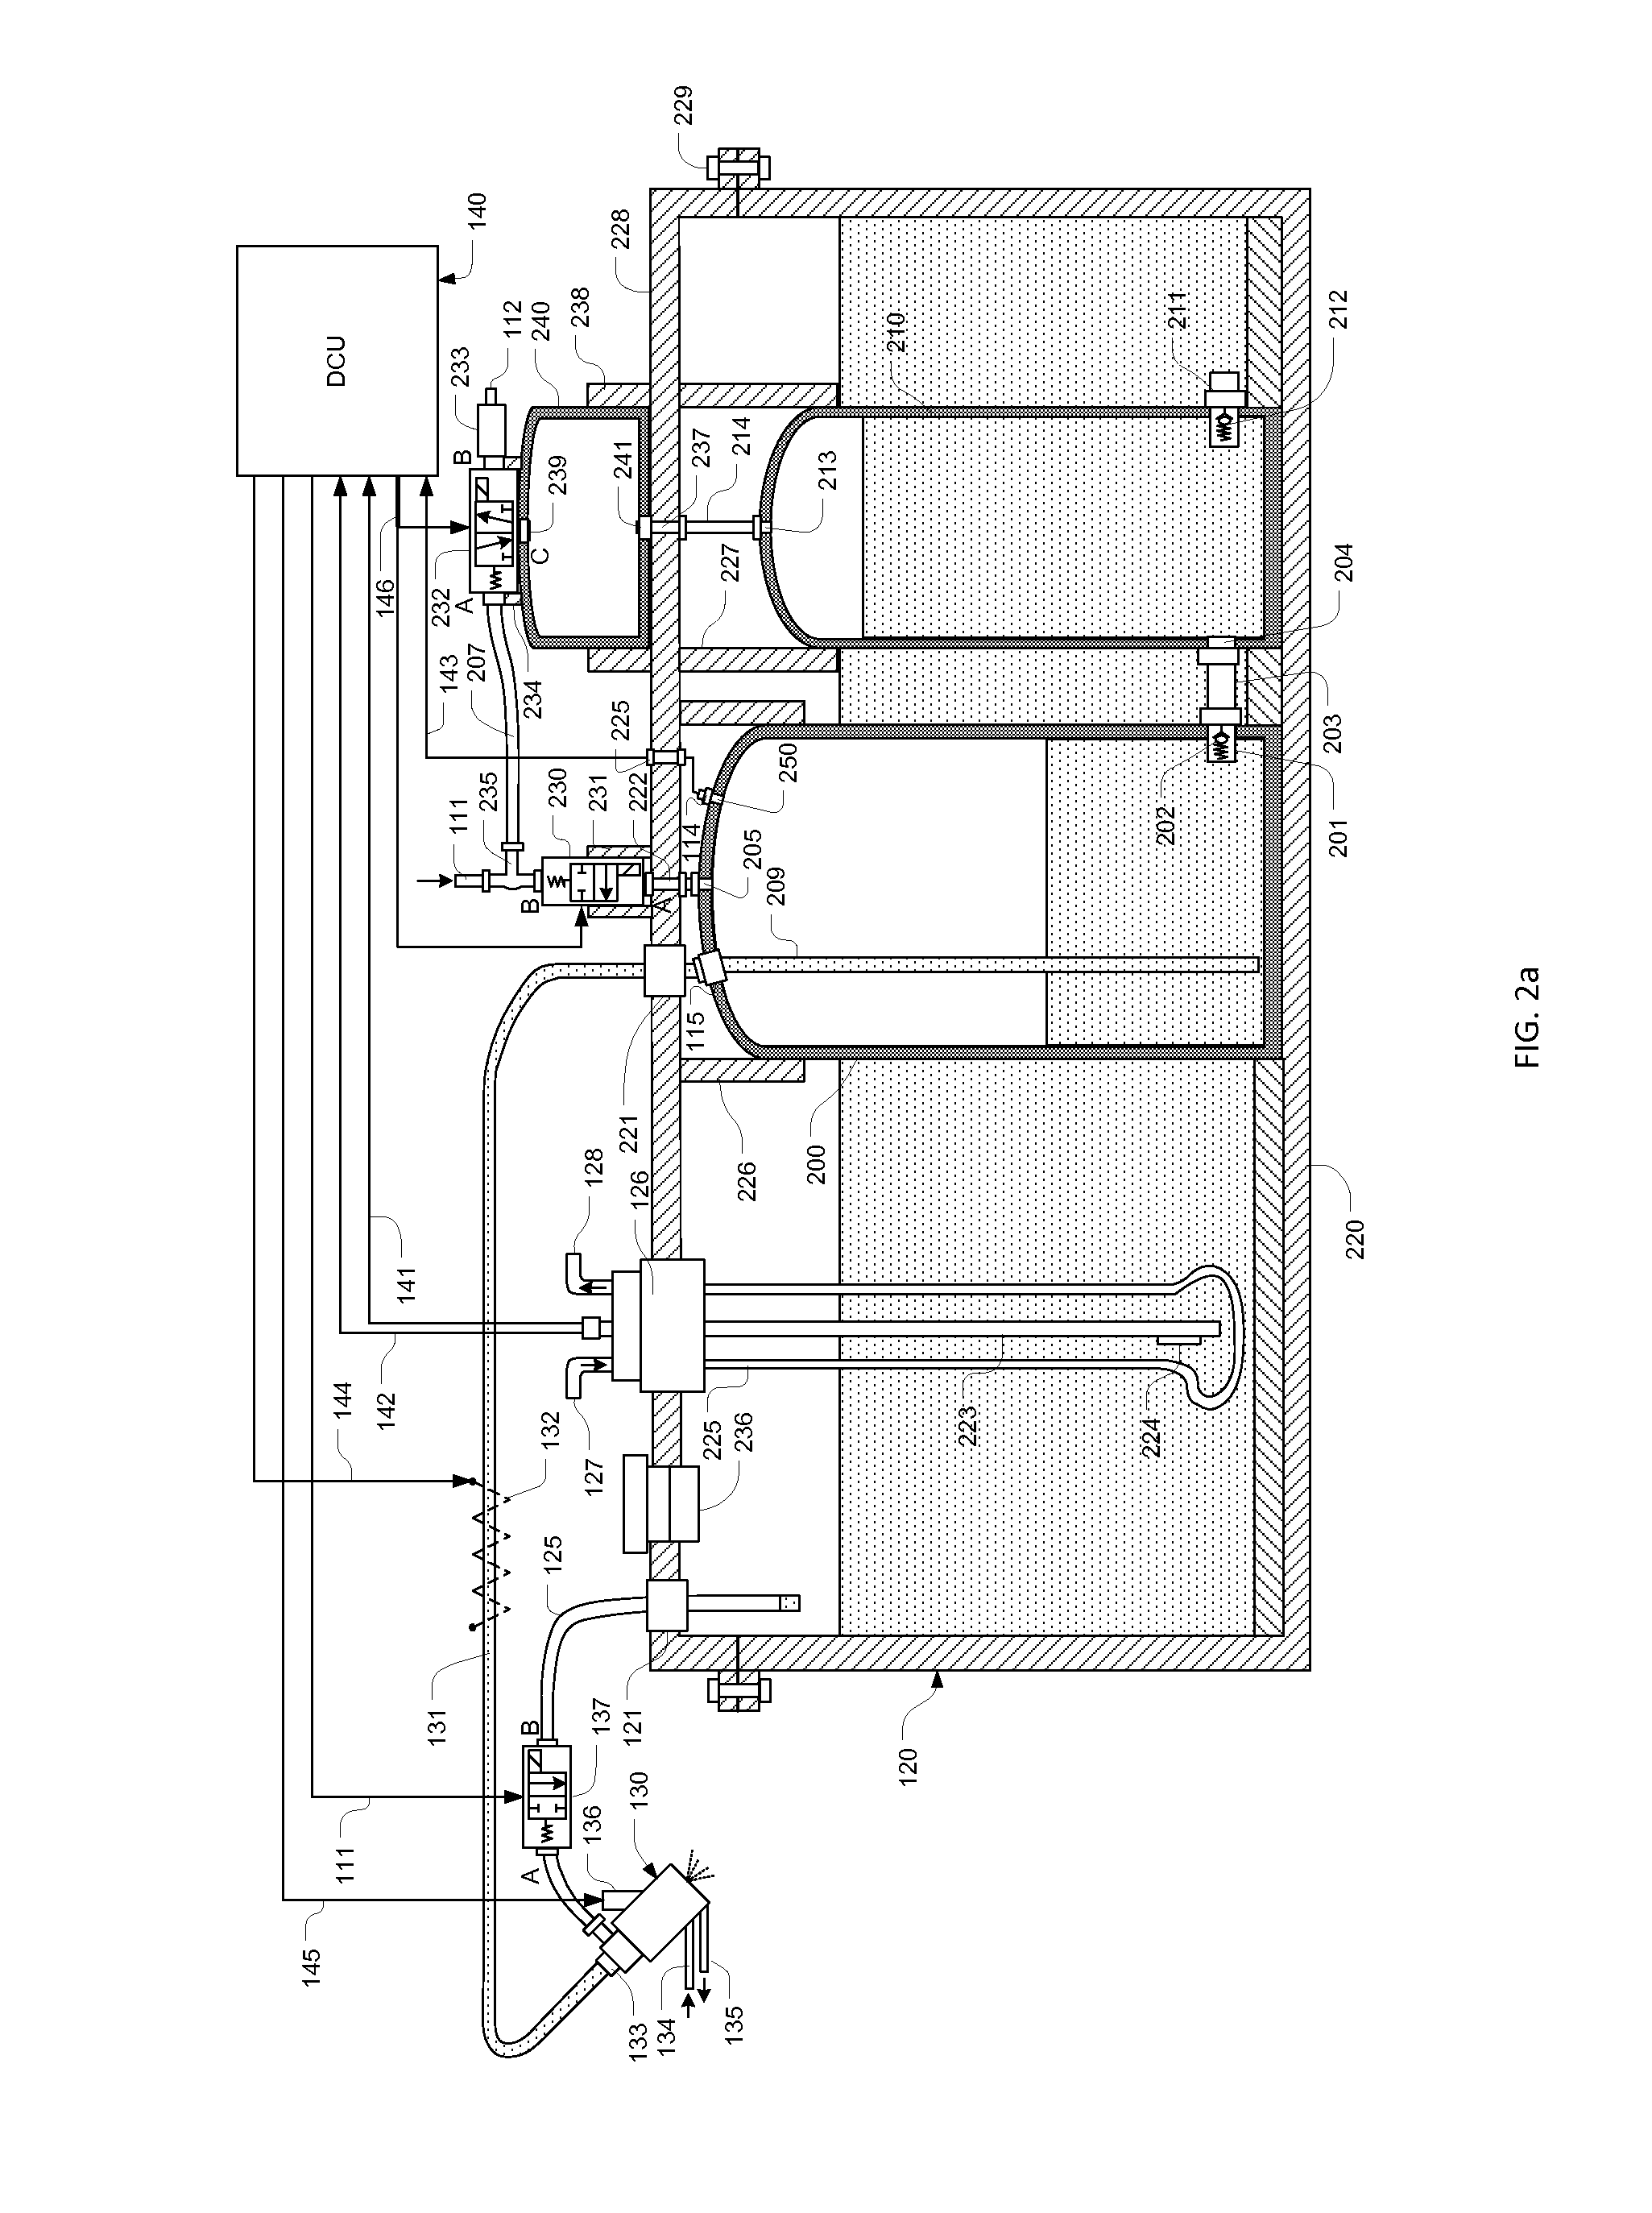 Air driven reductant dosing system